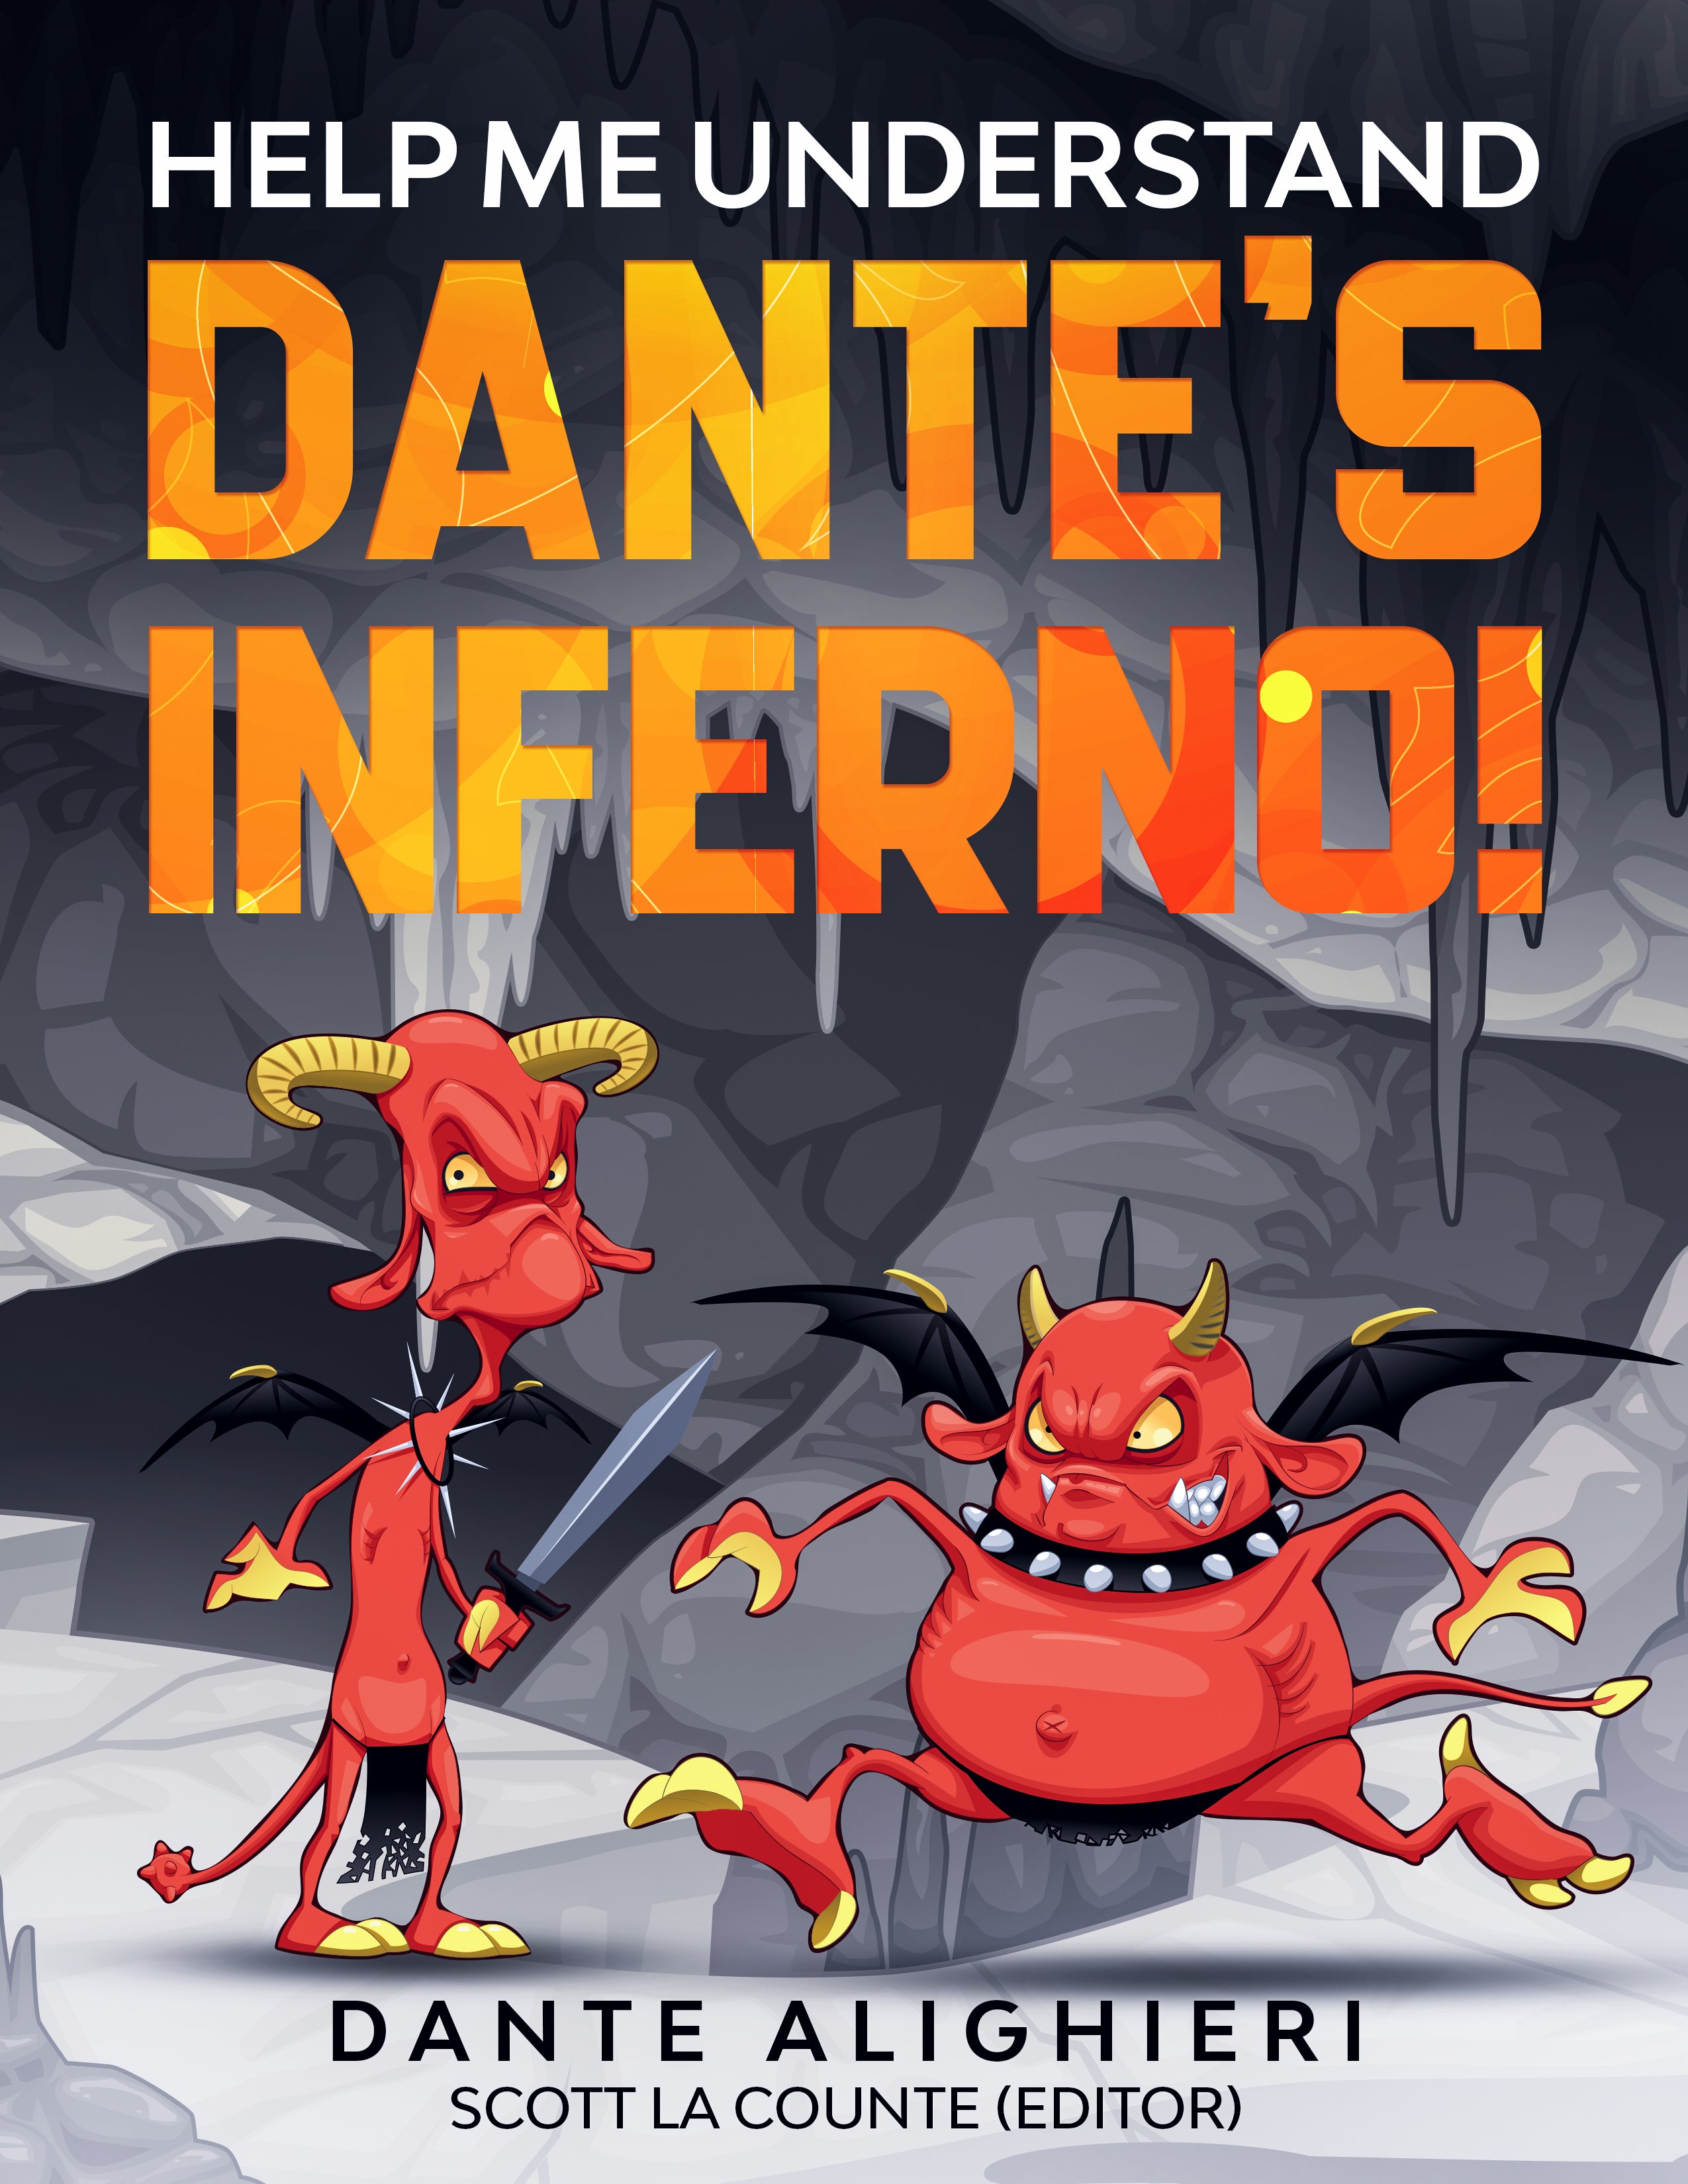 Dante's Inferno In Plain and Simple English (Digital Download